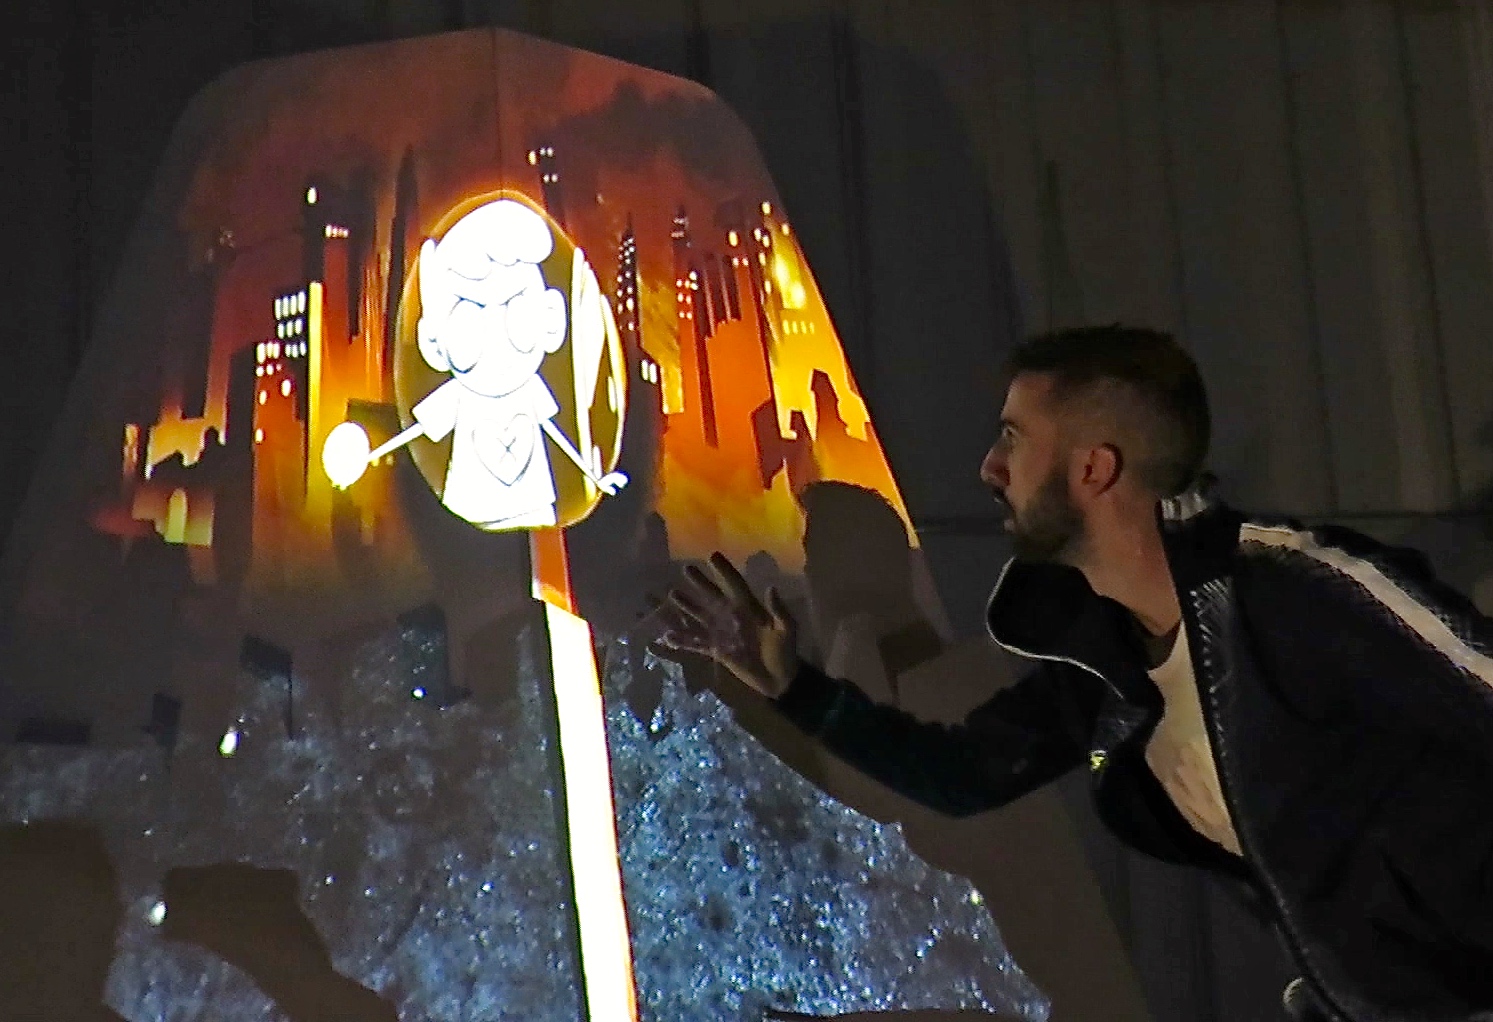 giant pop-up book video mapping